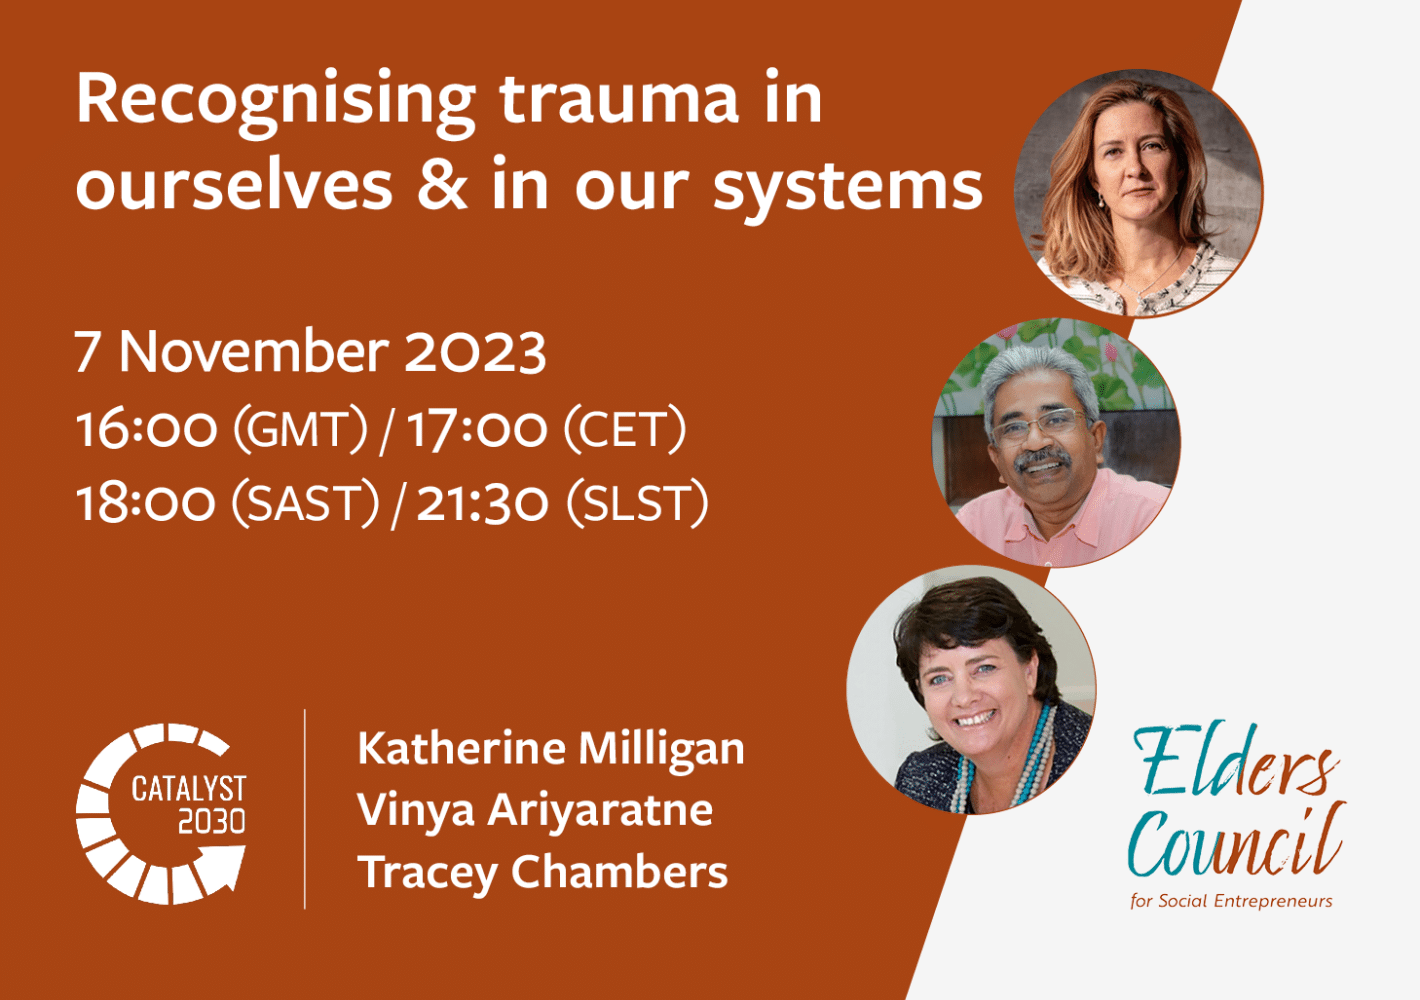 Elders Council Webinar: Recognising trauma in ourselves and in our systems